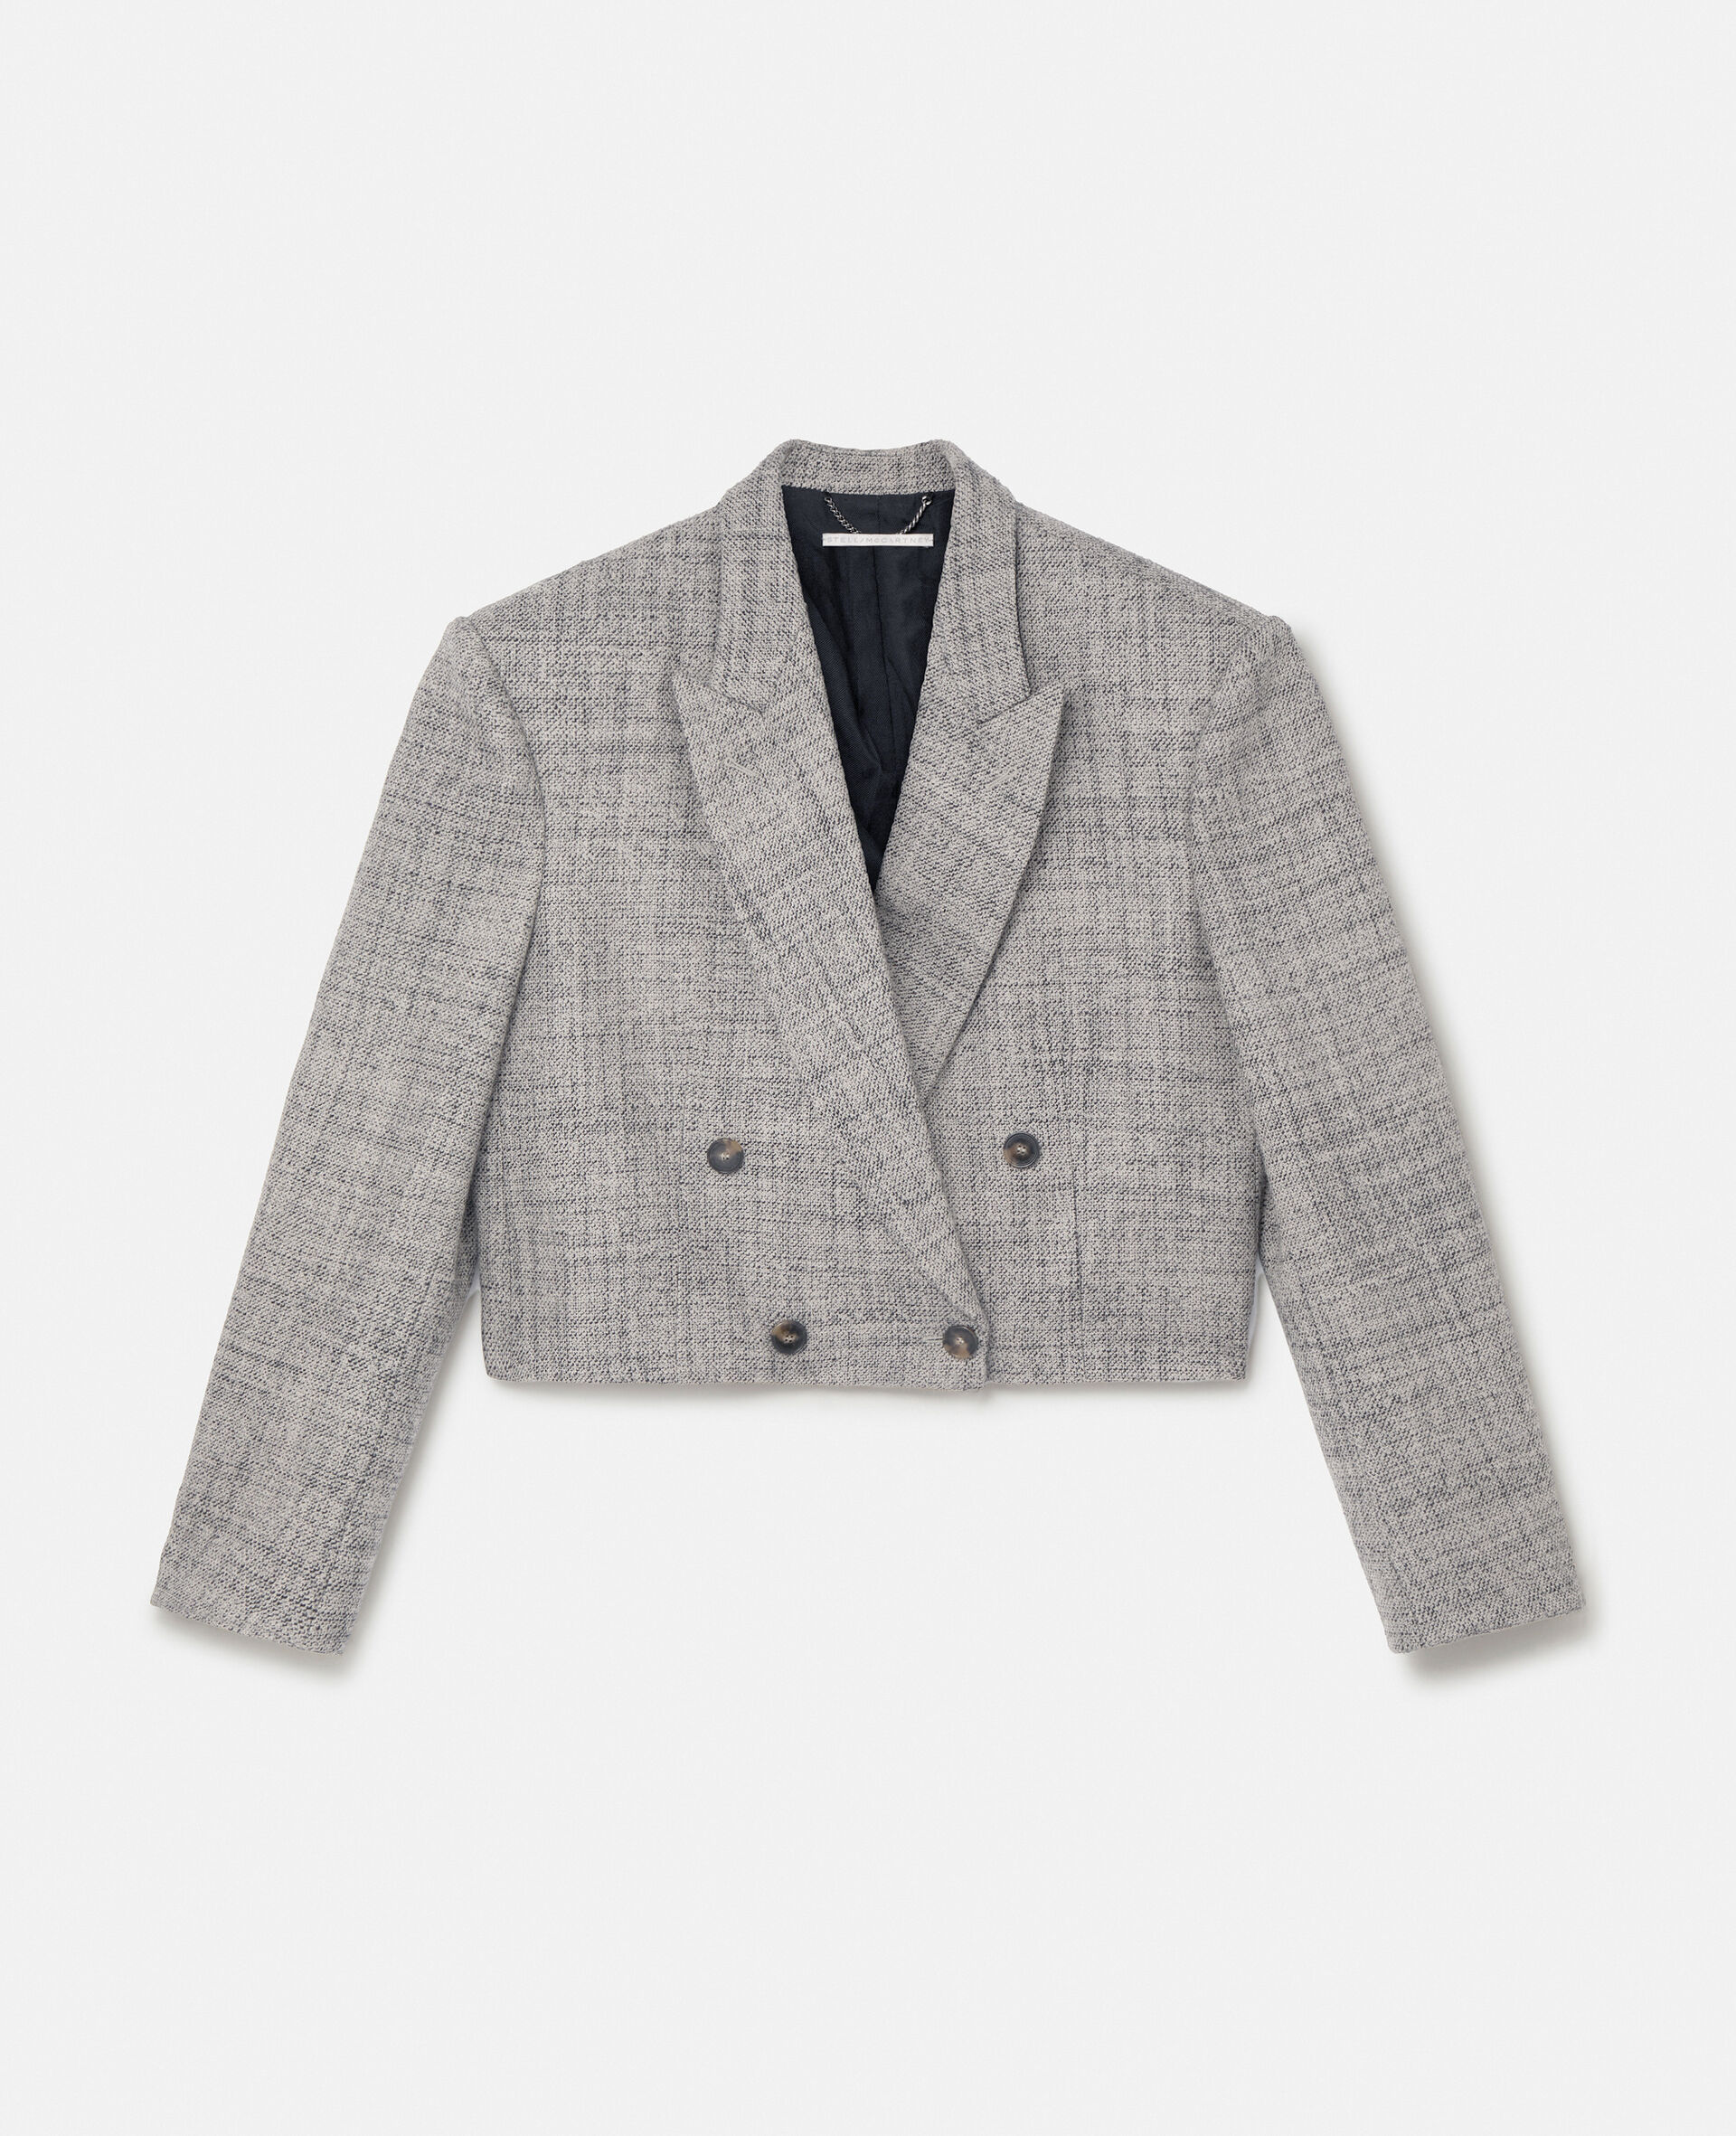 Cropped Boxy Double-Breasted Blazer-Brown-large image number 0